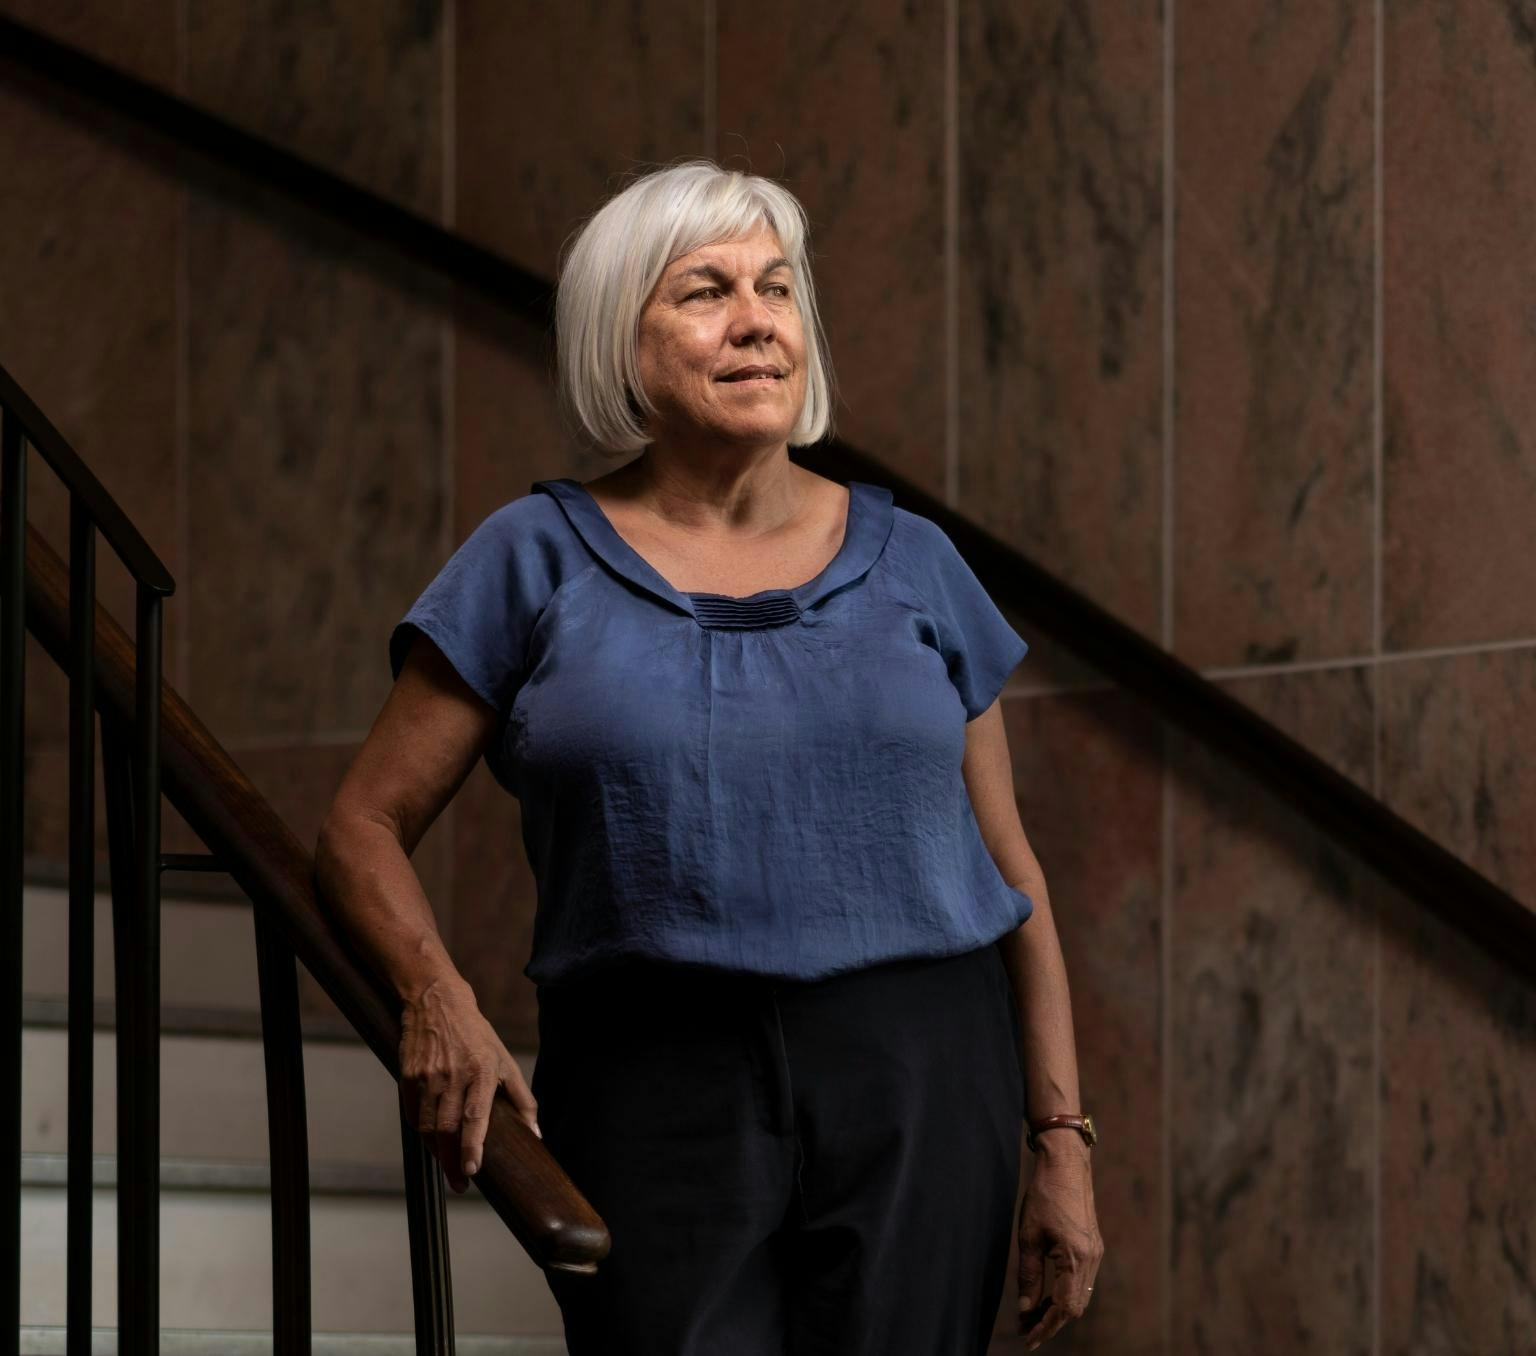 Jill is wearing a blue blouse and black pants. She has a grey bob. She is standing on a staircase in front of a brown stone wall and looking past the camera